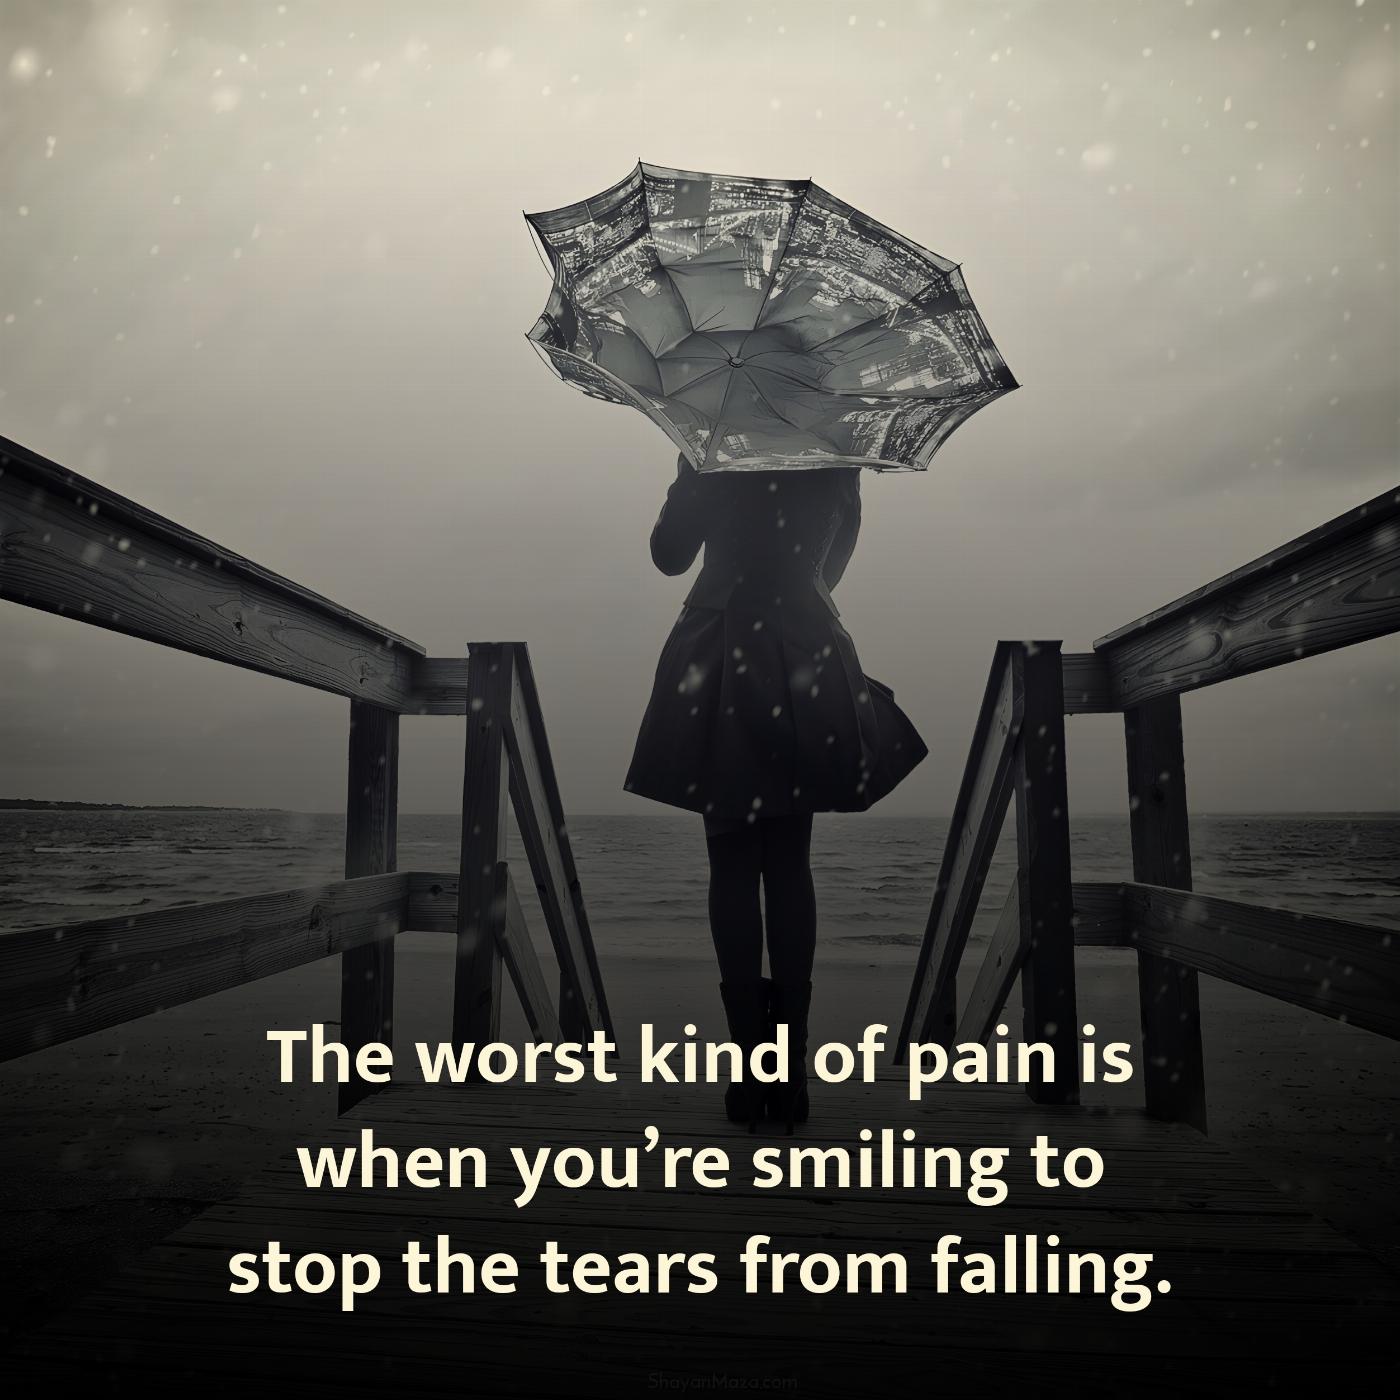 The worst kind of pain is when youre smiling to stop the tears